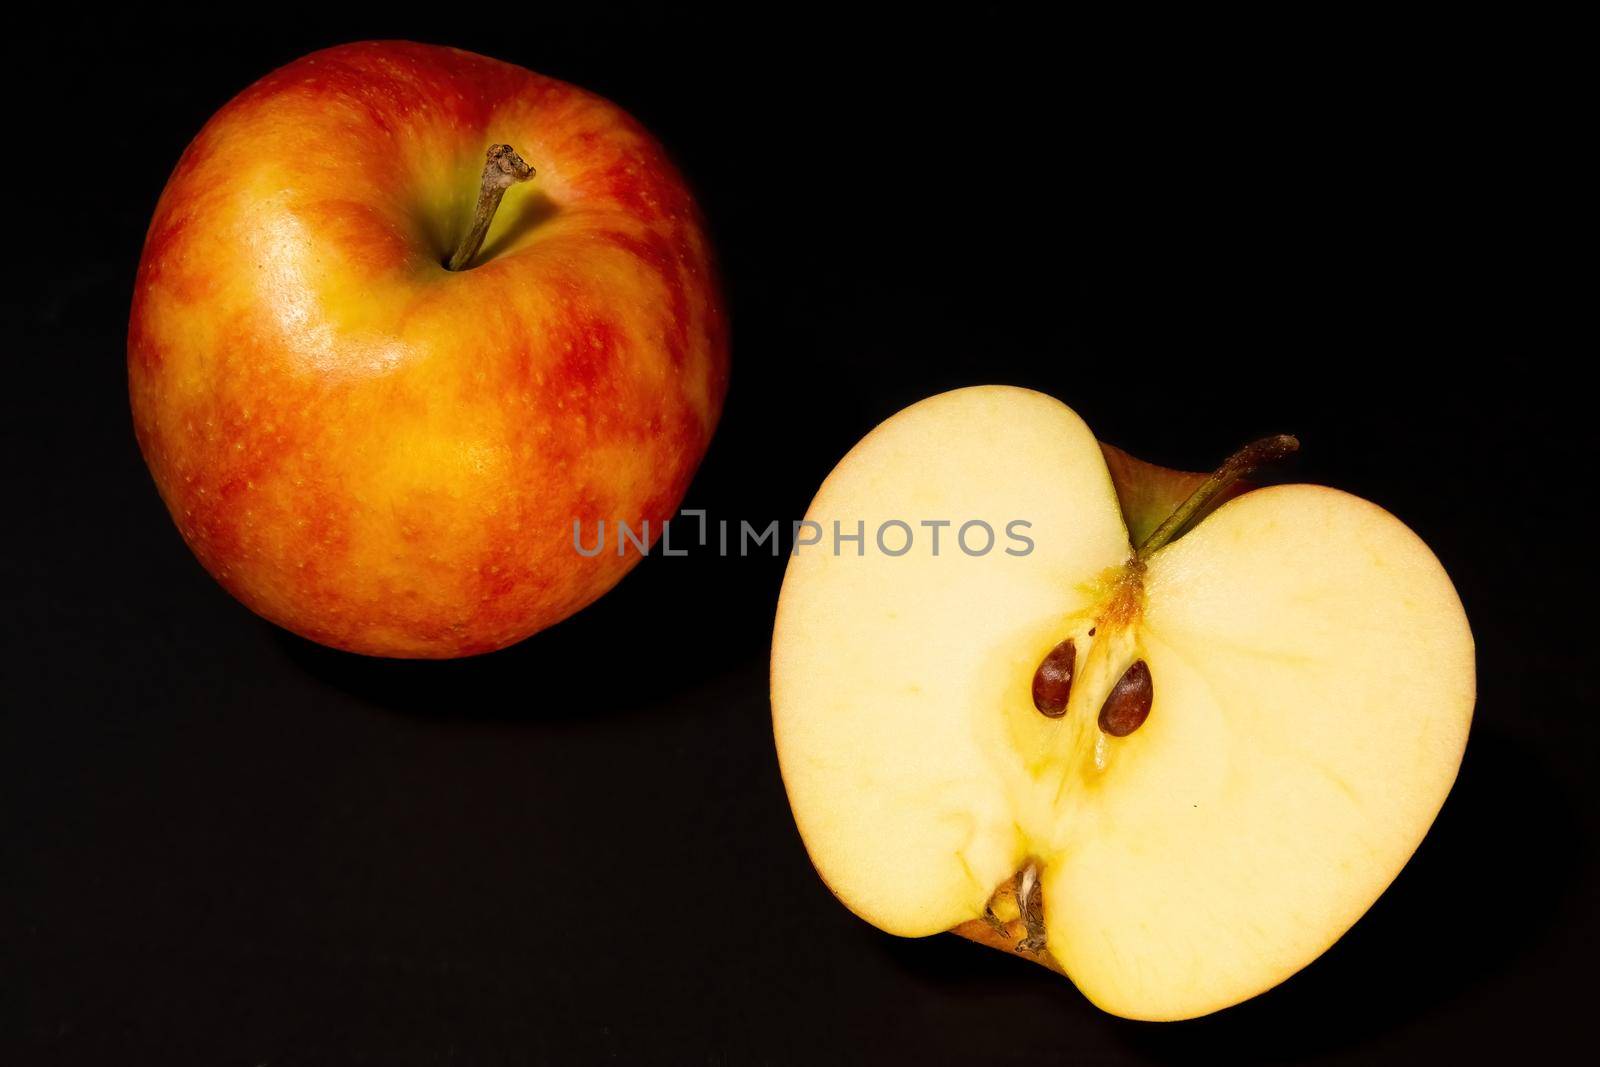 Ripe red apples on a dark background, whole apple and cut in half